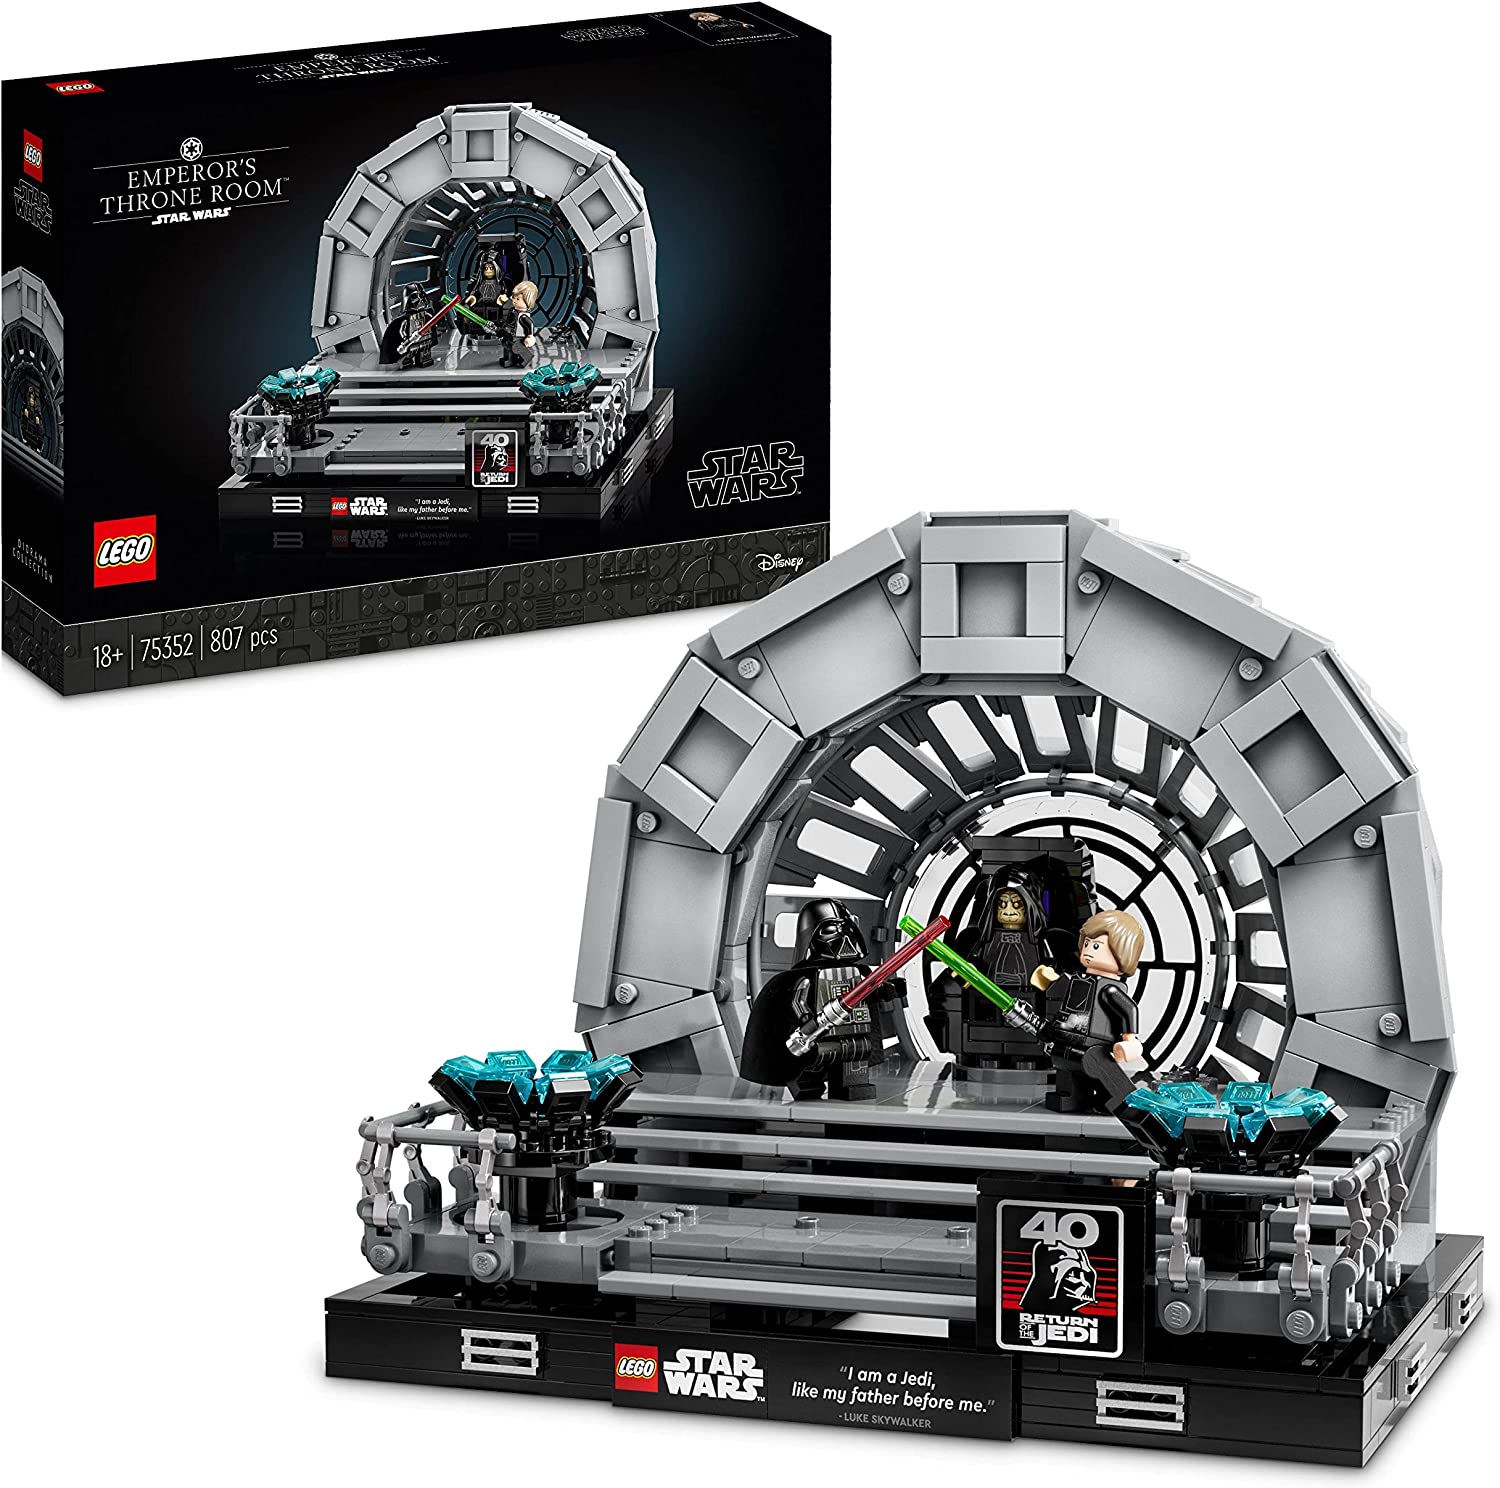 LEGO 75352 Star Wars Emperor \ 'S Throna Room - Diorama, Return of the Jedi Knights 40th Anniversary Set, Collectible Gift for Adults with Luke Skywalker and Darth Vader Mini Figures